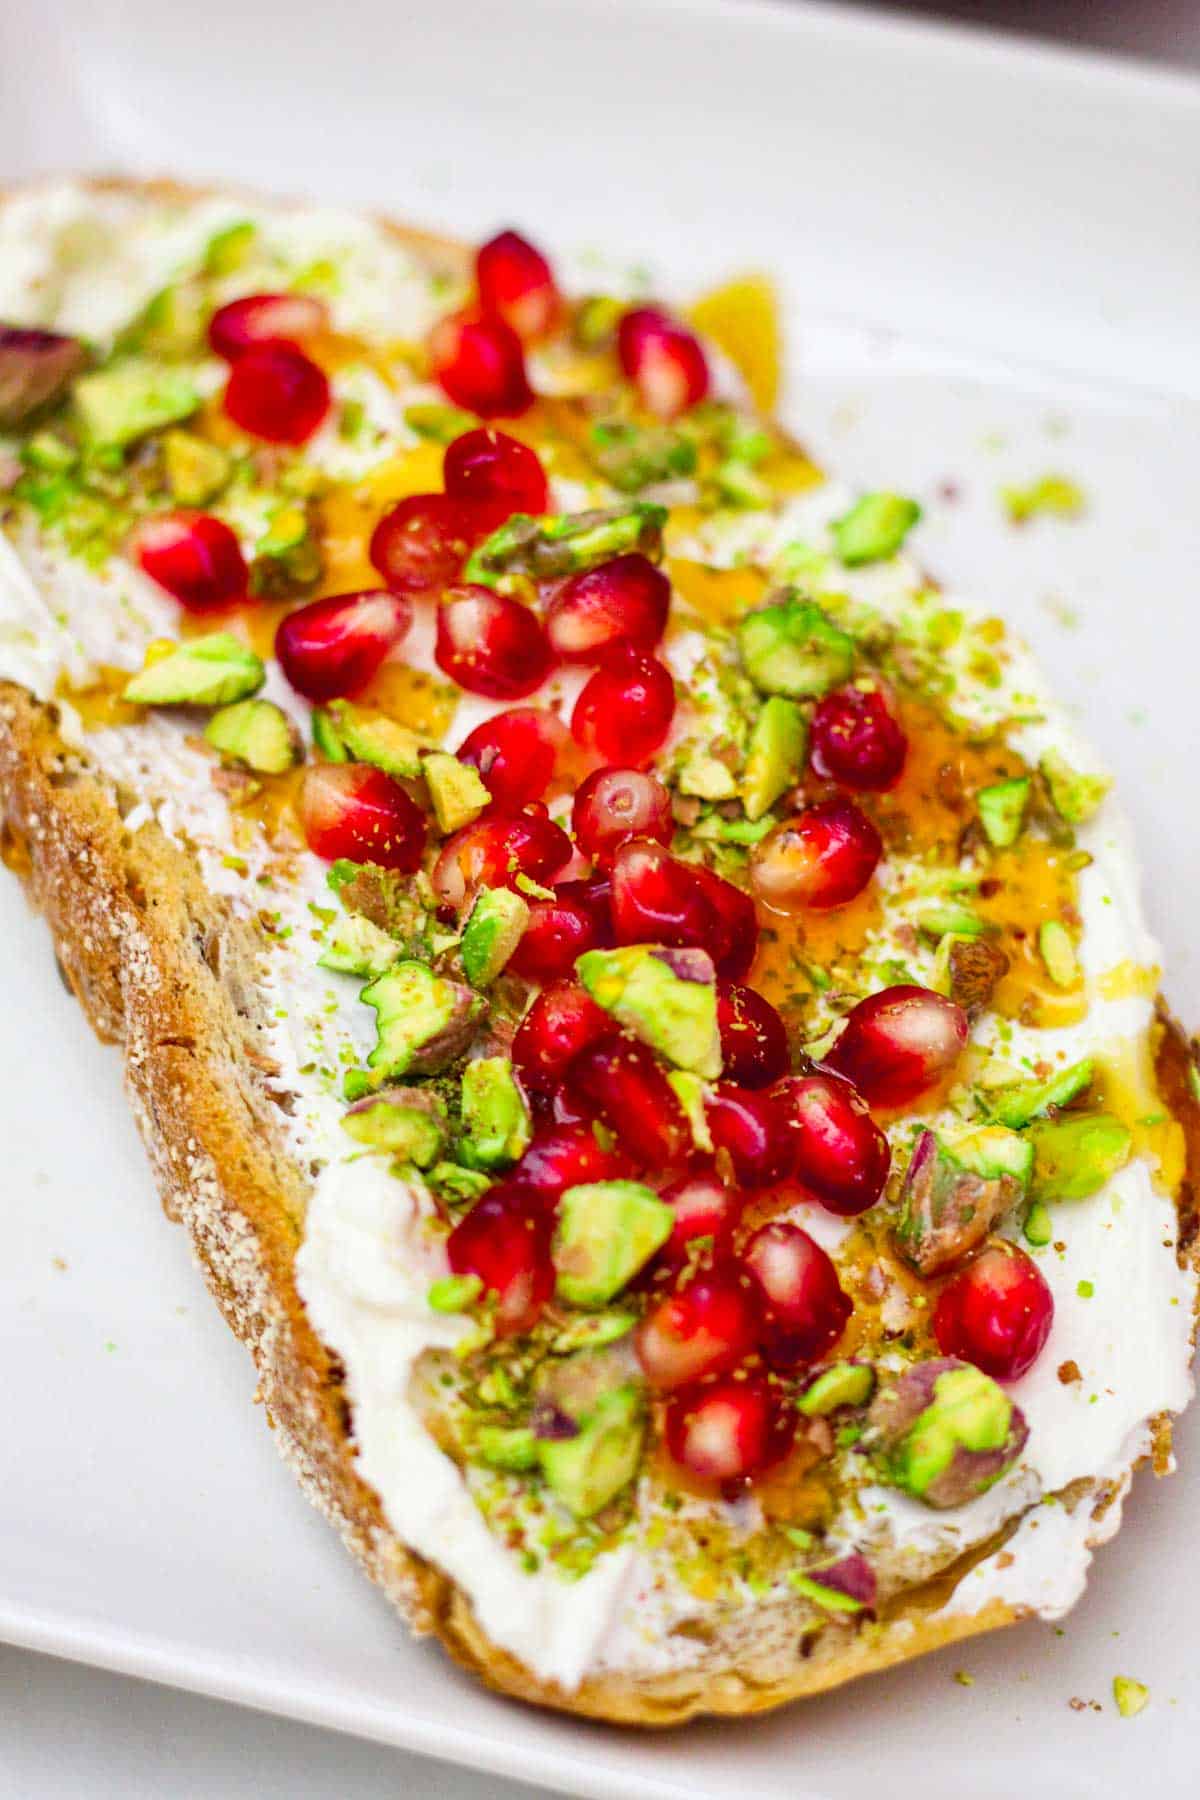 Strained yogurt spread over sourdough bread with pomegranate, pistachios and honey.